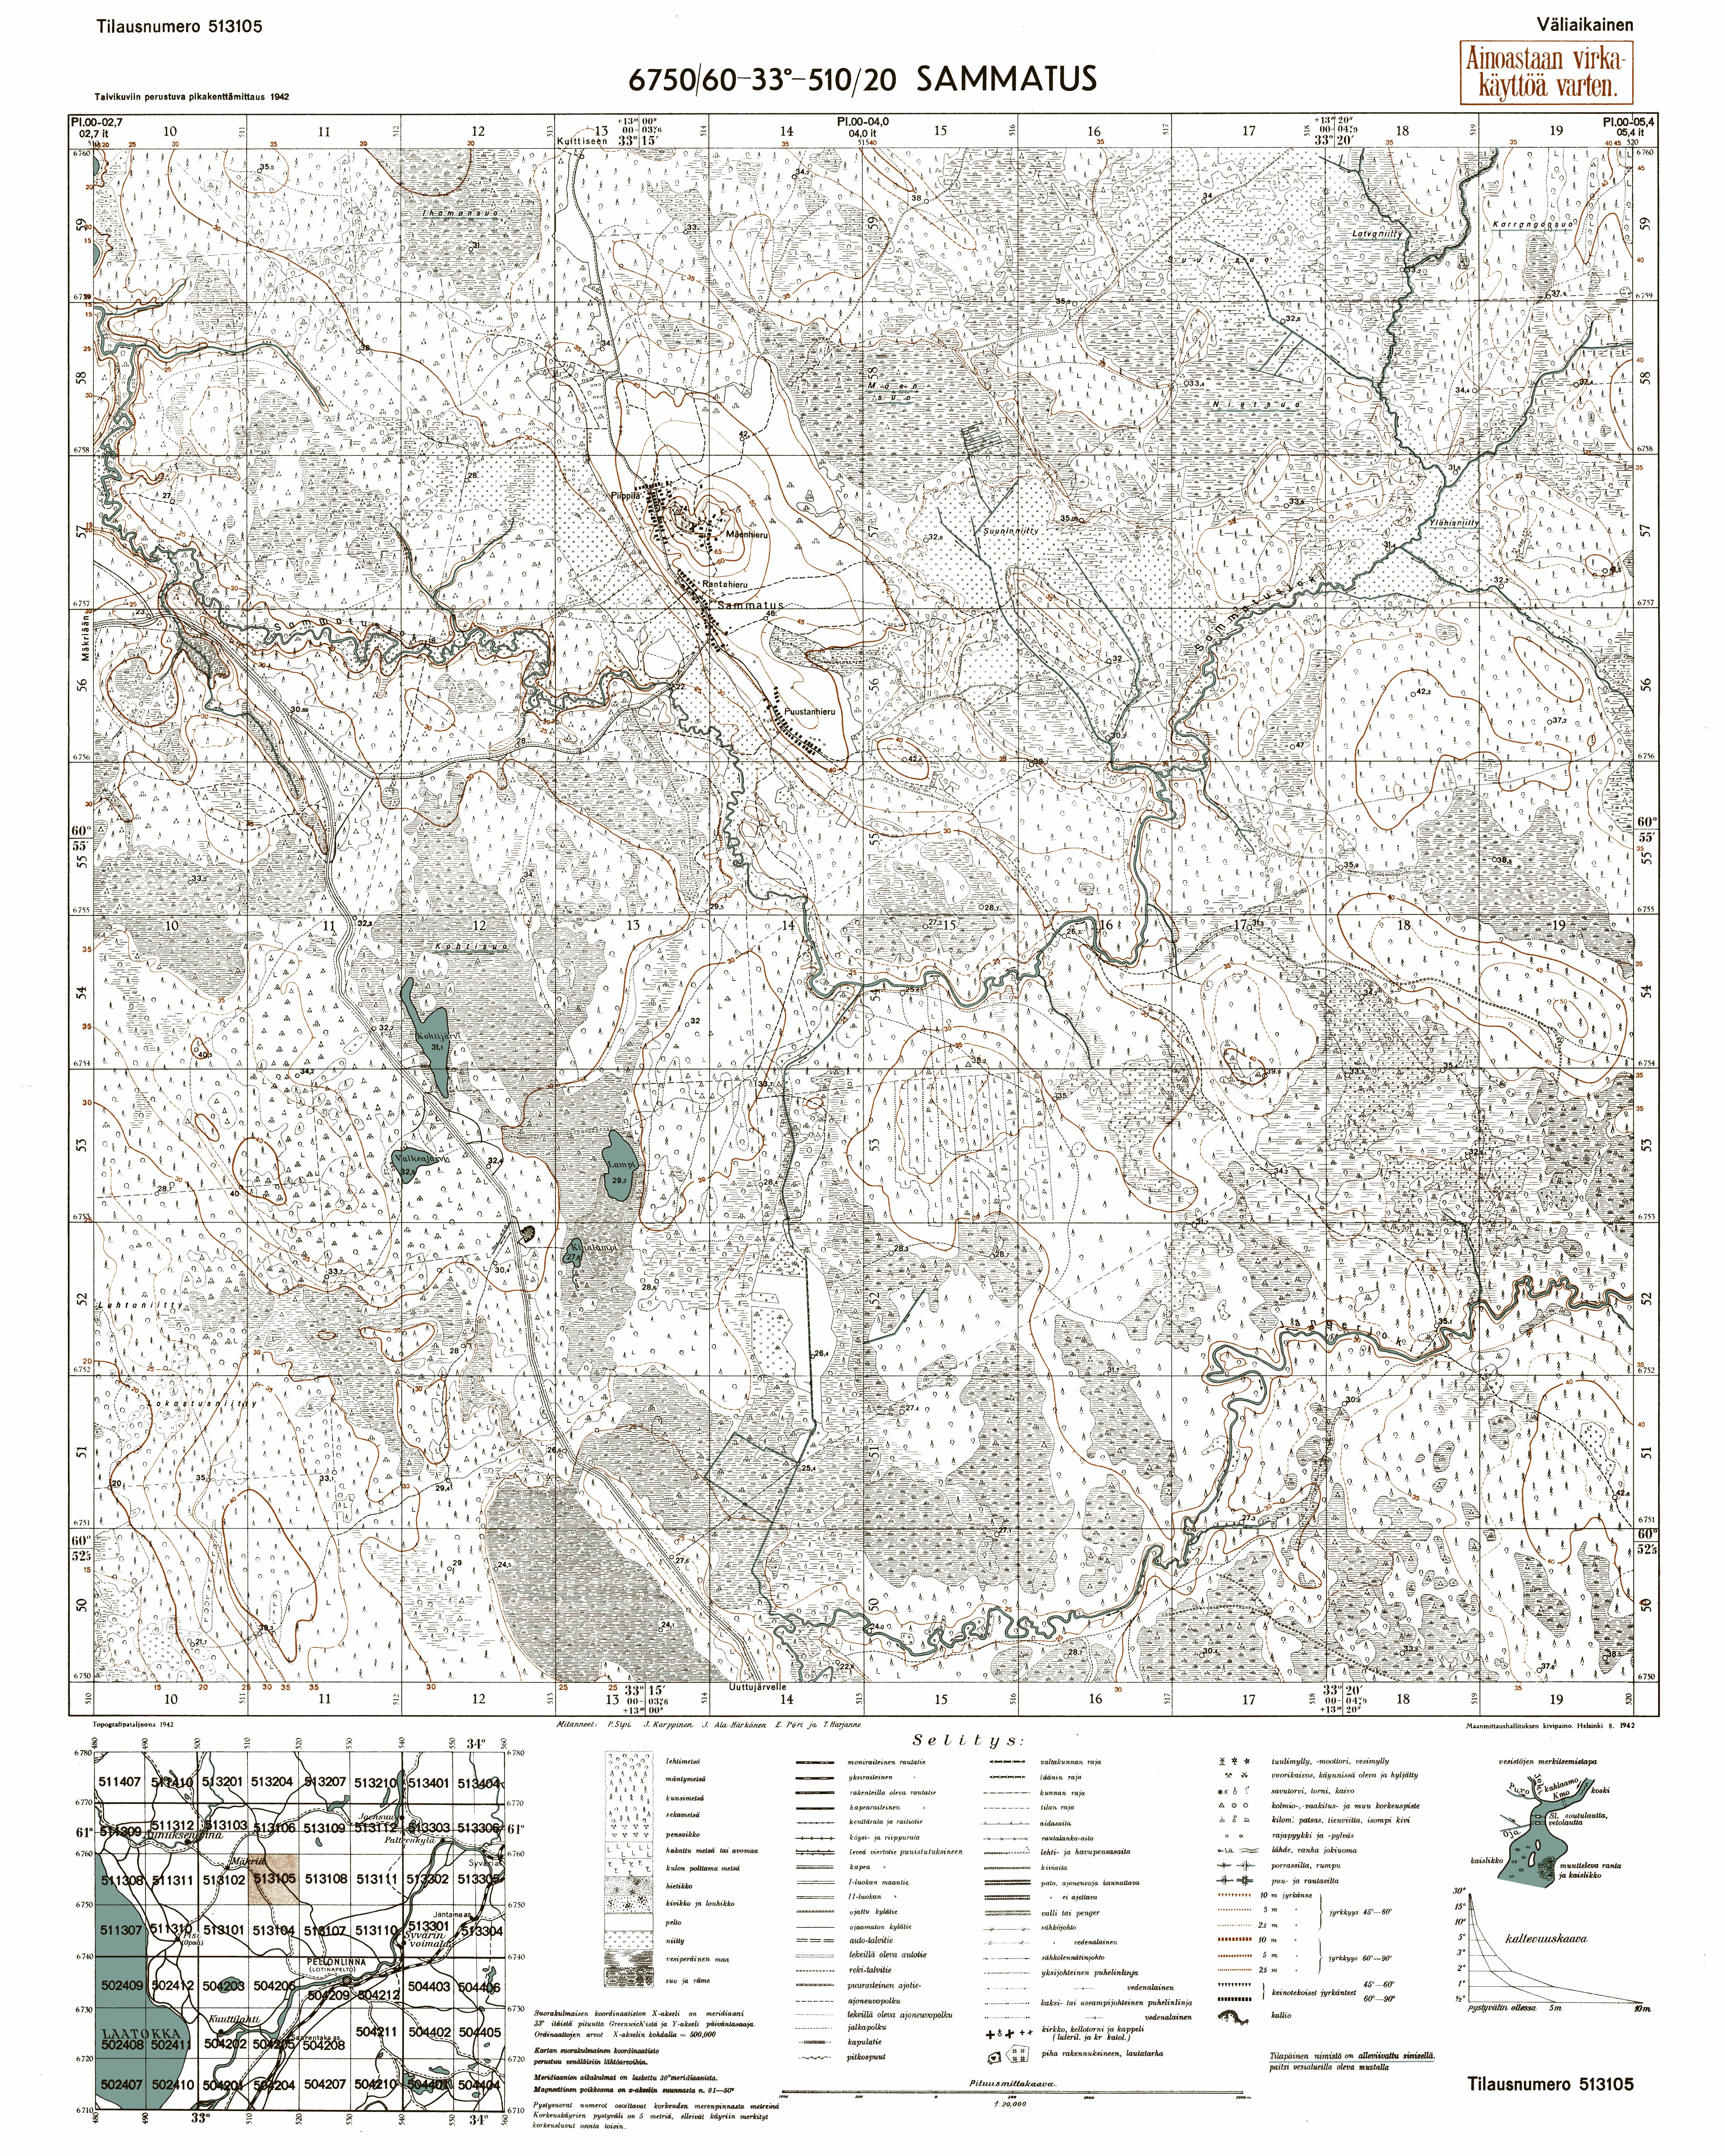 Sambatuksa. Sammatus. Topografikartta 513105. Topographic map from 1942. Use the zooming tool to explore in higher level of detail. Obtain as a quality print or high resolution image